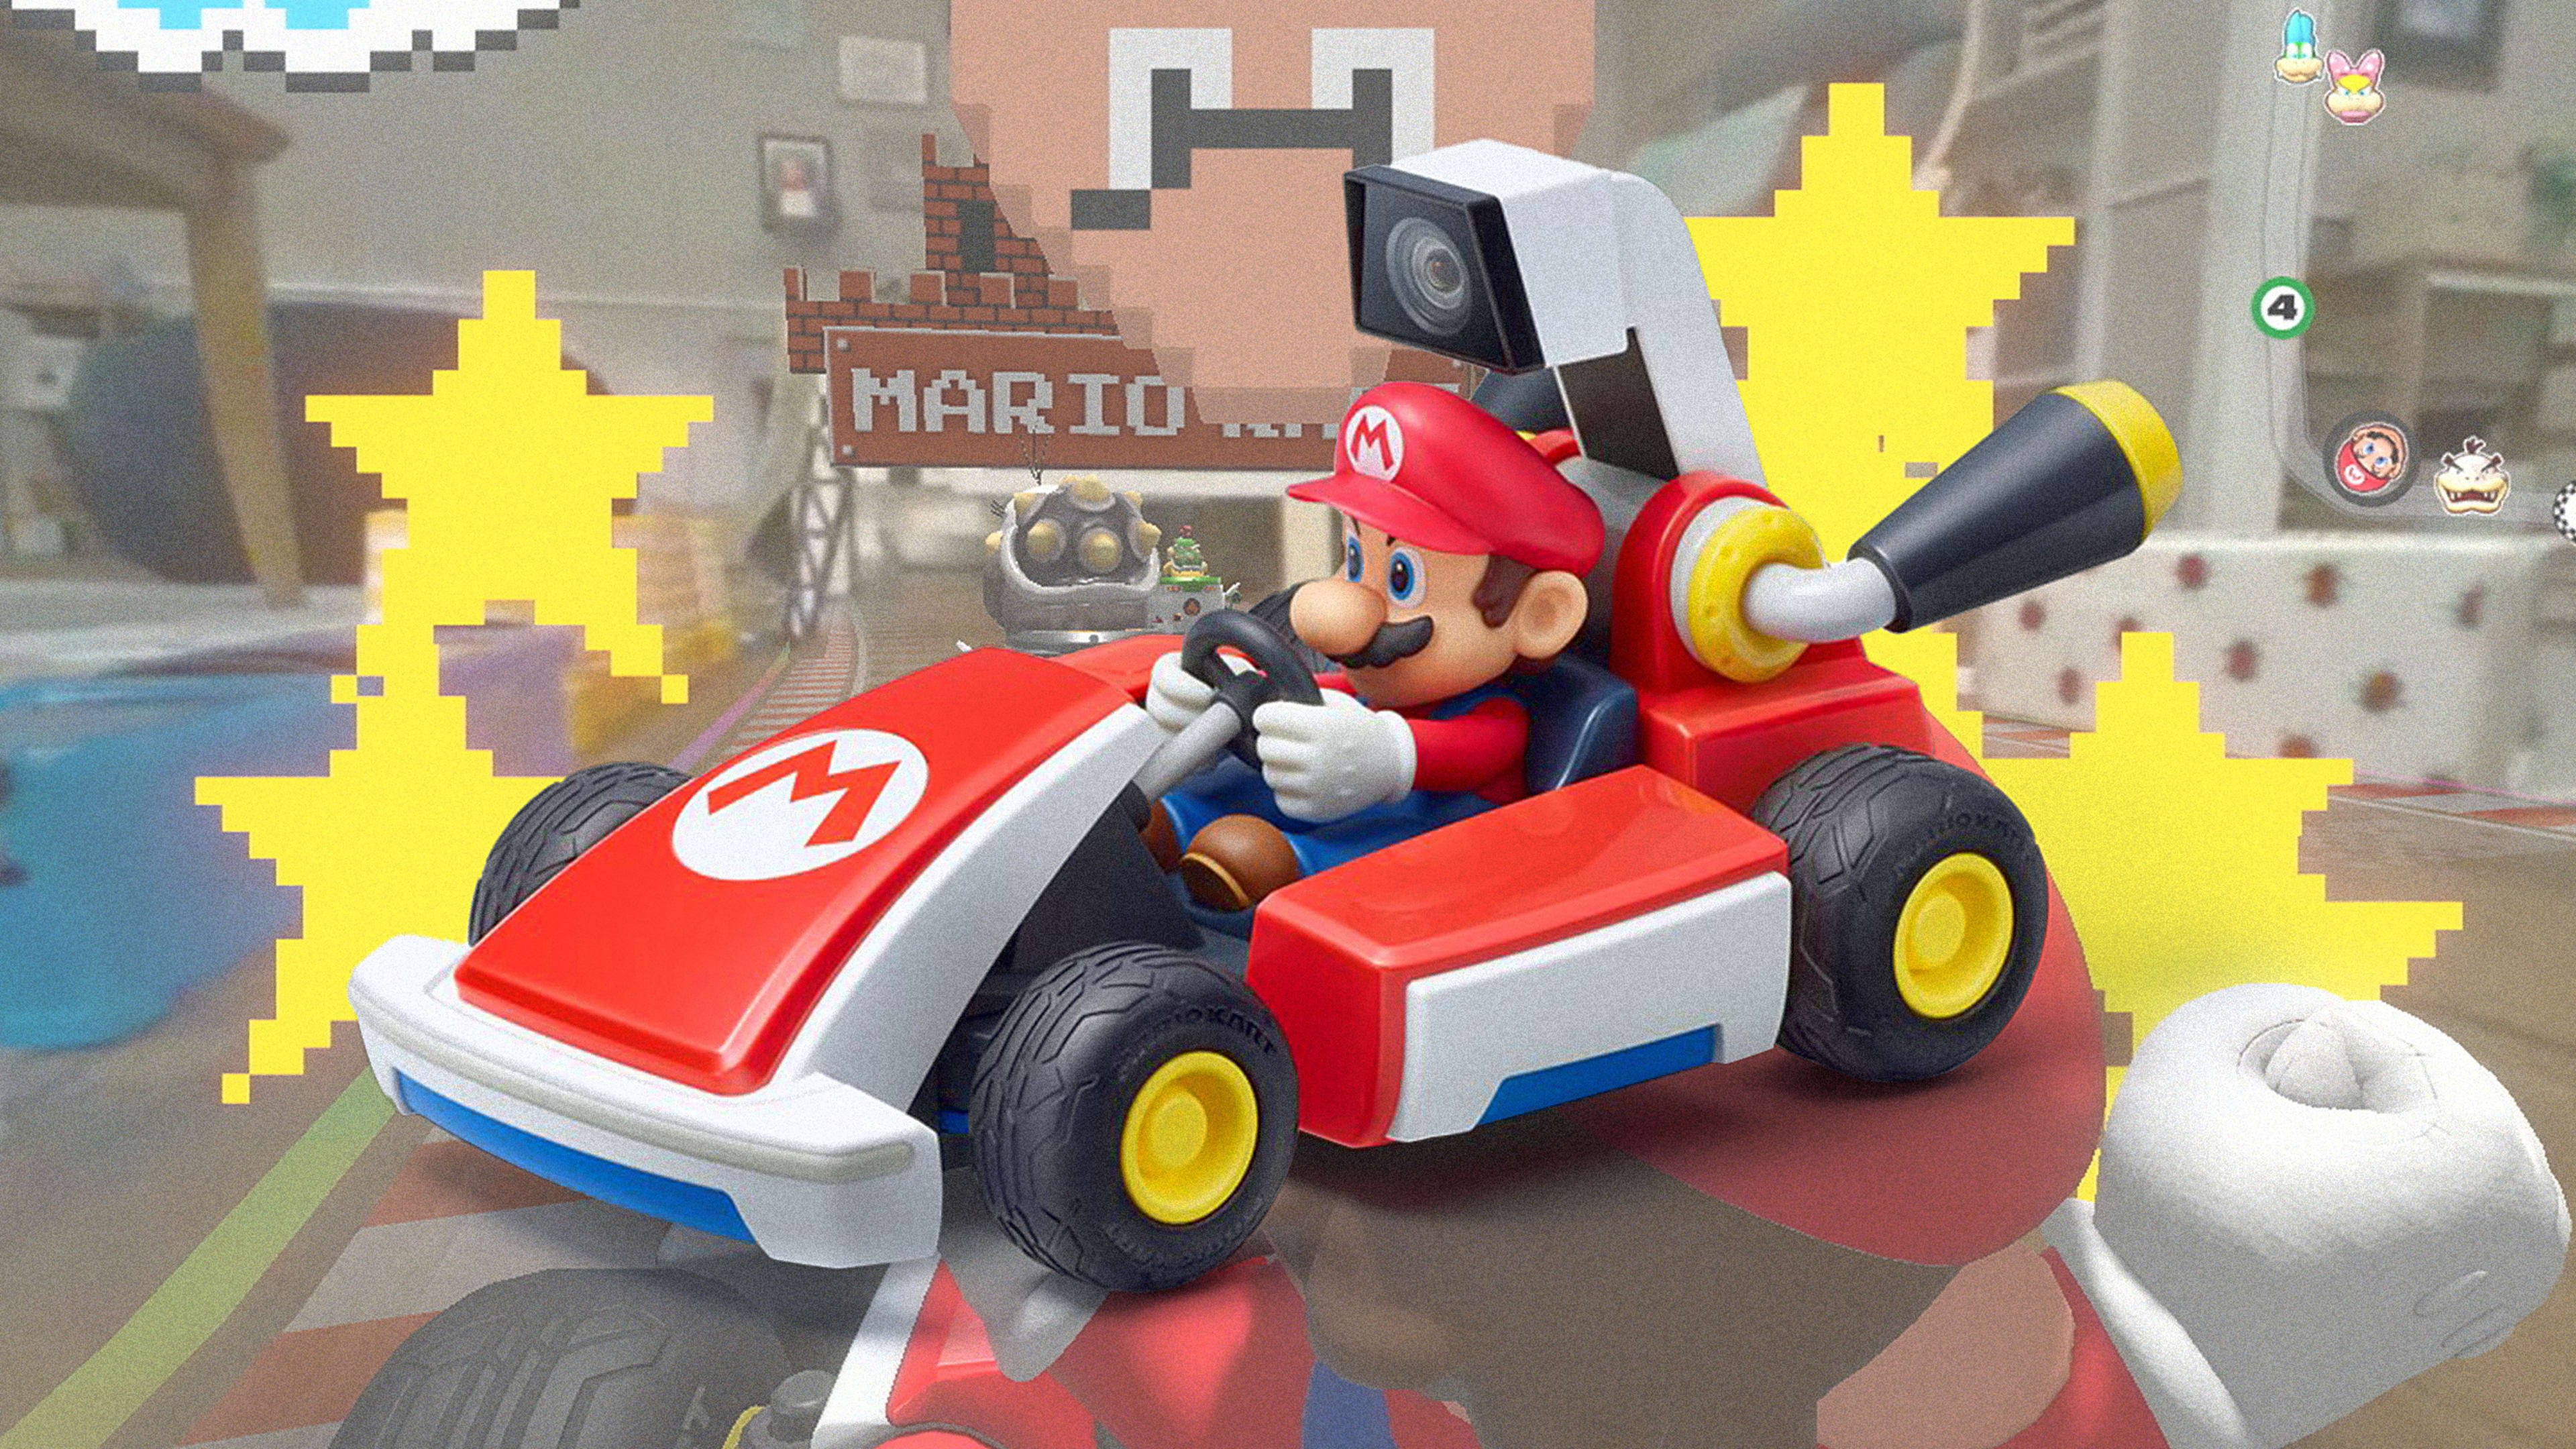 I spent a weekend playing ‘Mario Kart Live.’ Here’s why you should, too